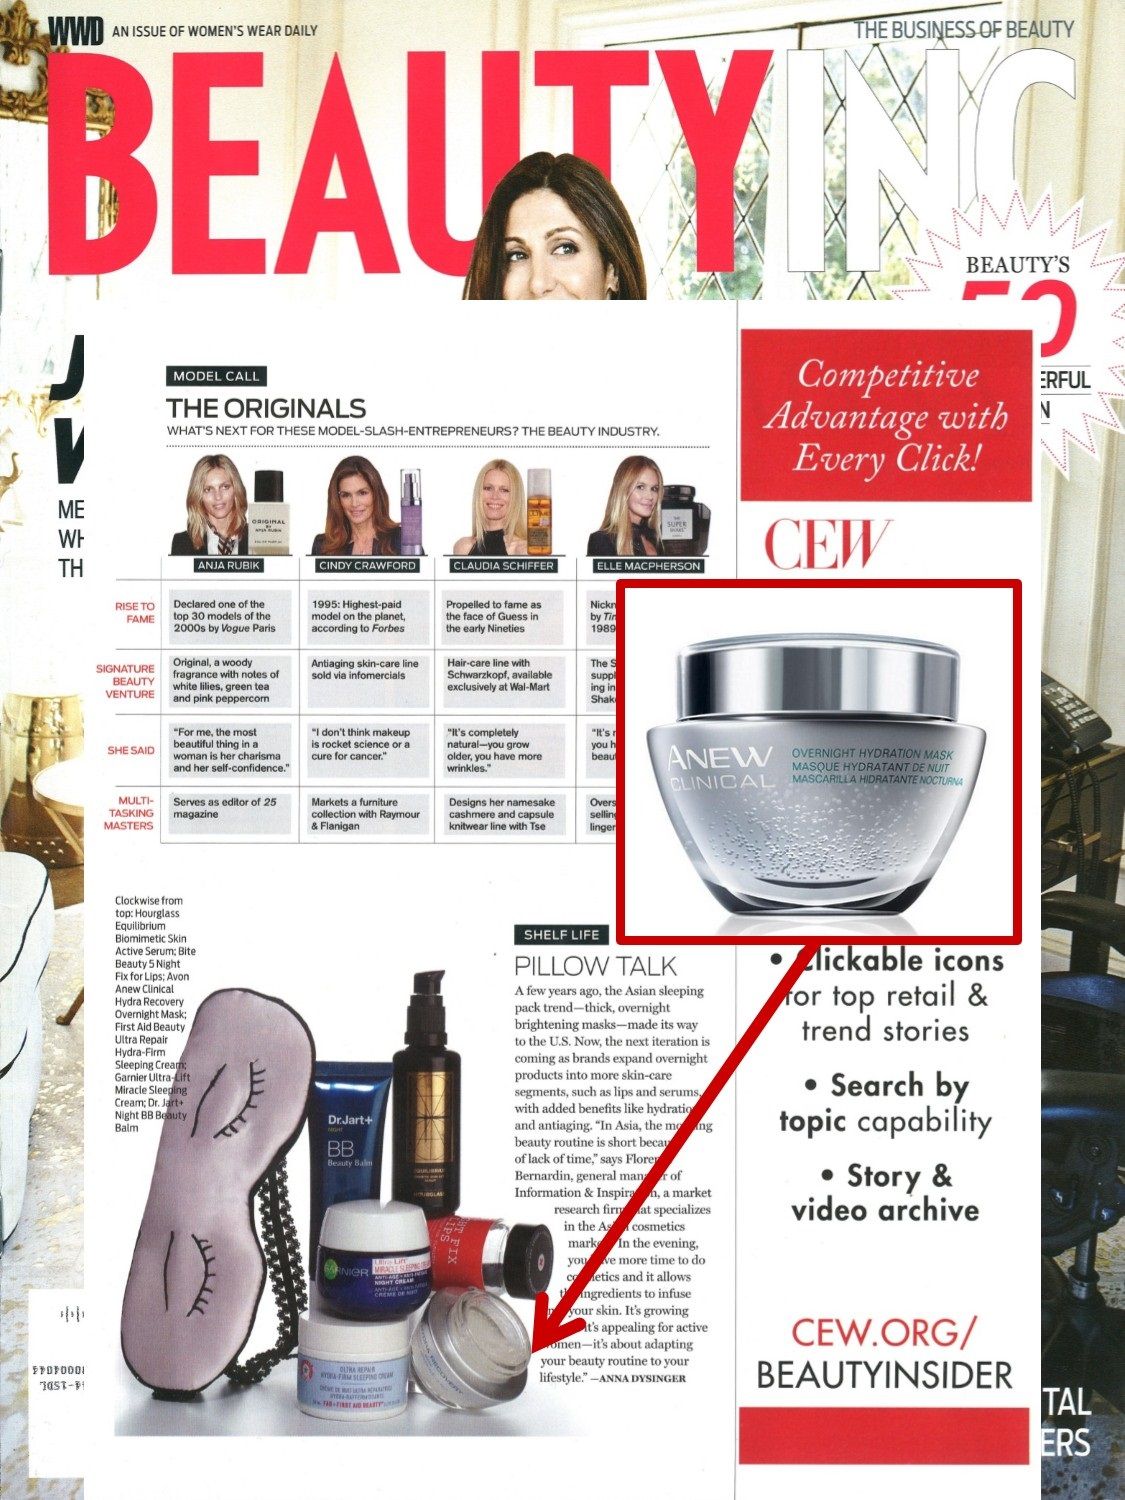 WWD featured our ANEW Clinical Overnight Hydration Mask in their latest issue! #ANEWyou